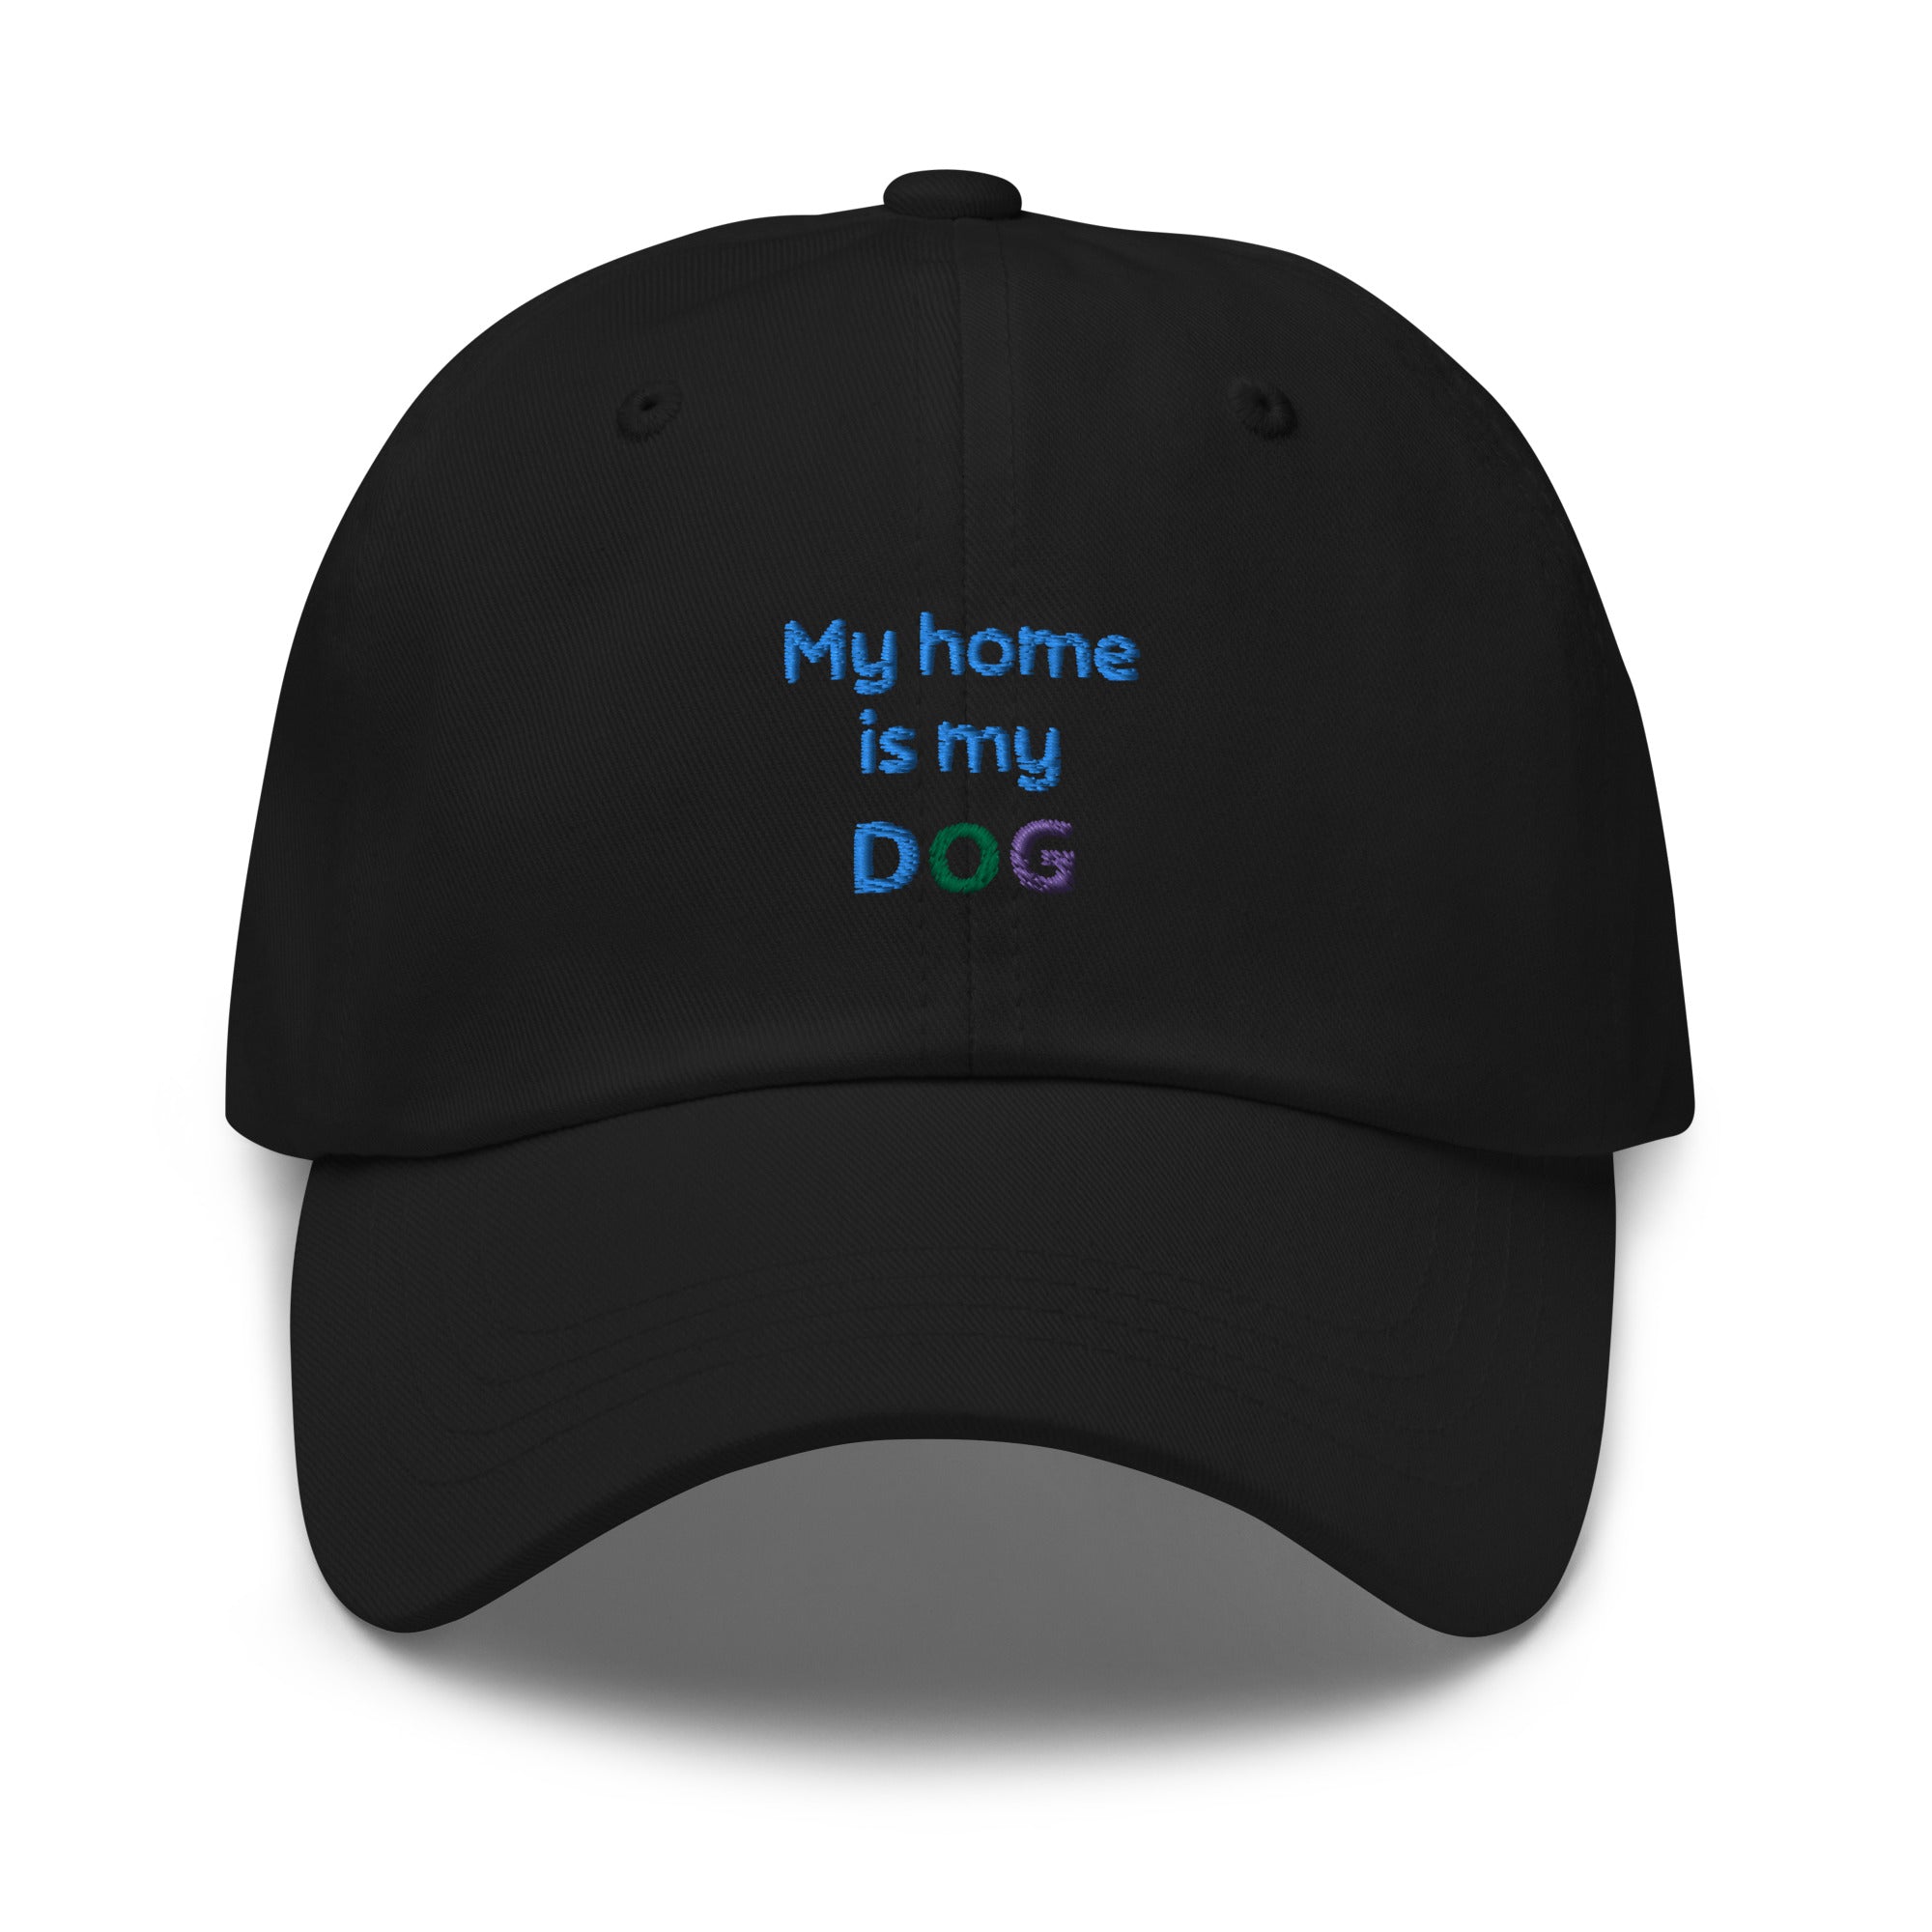 "My Home Is My Dog" Dad hat